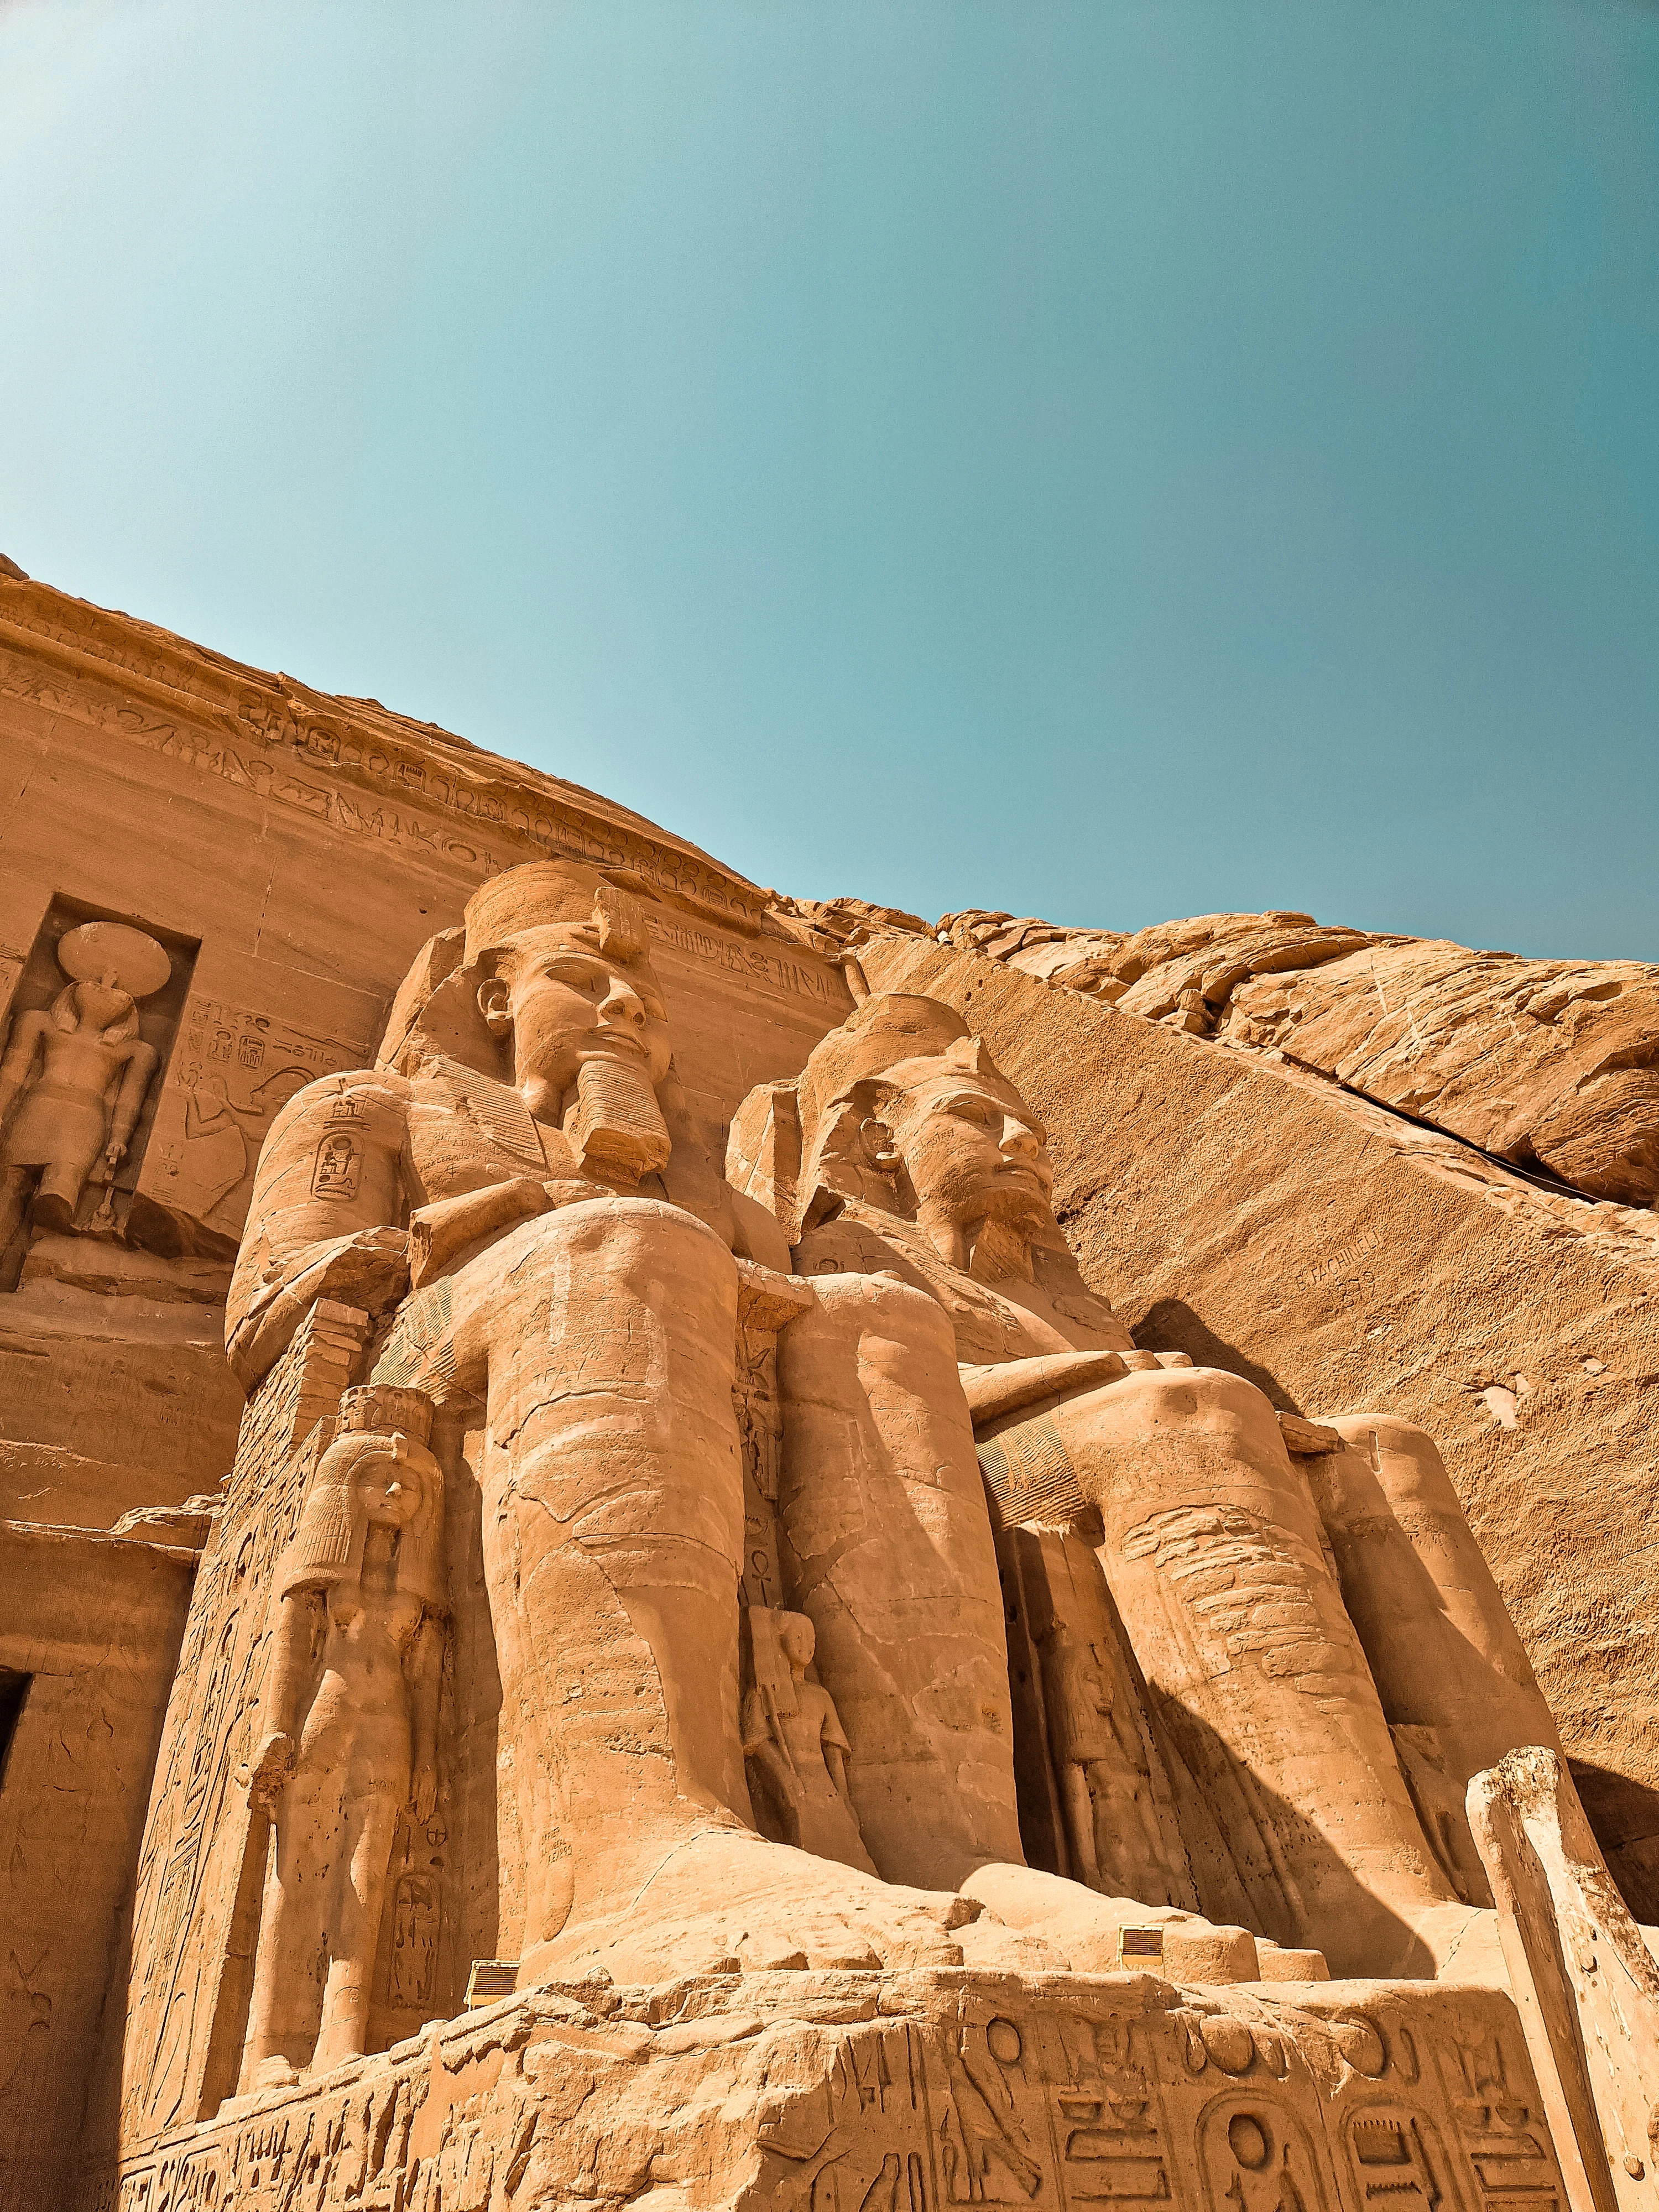 The scale of everything in Abu Simbel is impressive